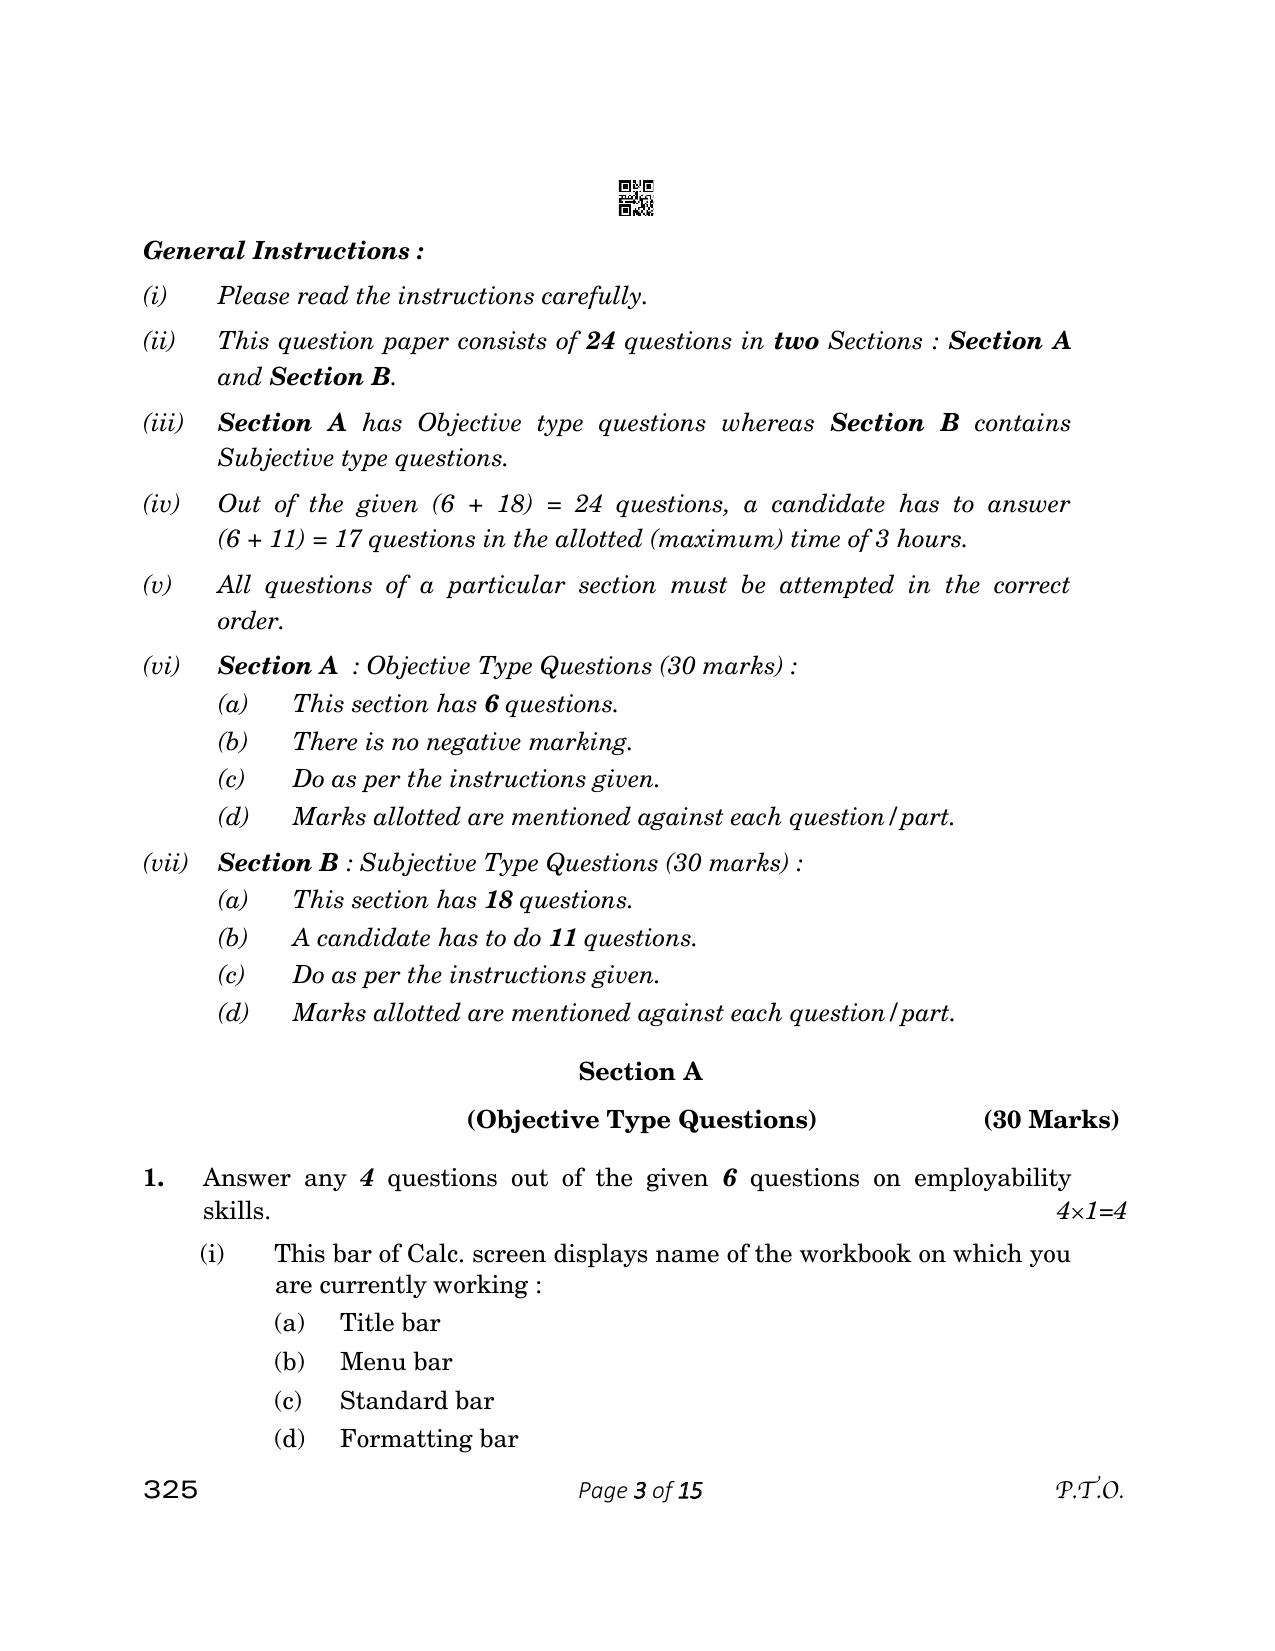 CBSE Class 12 325 Retail 2023 Question Paper - Page 3